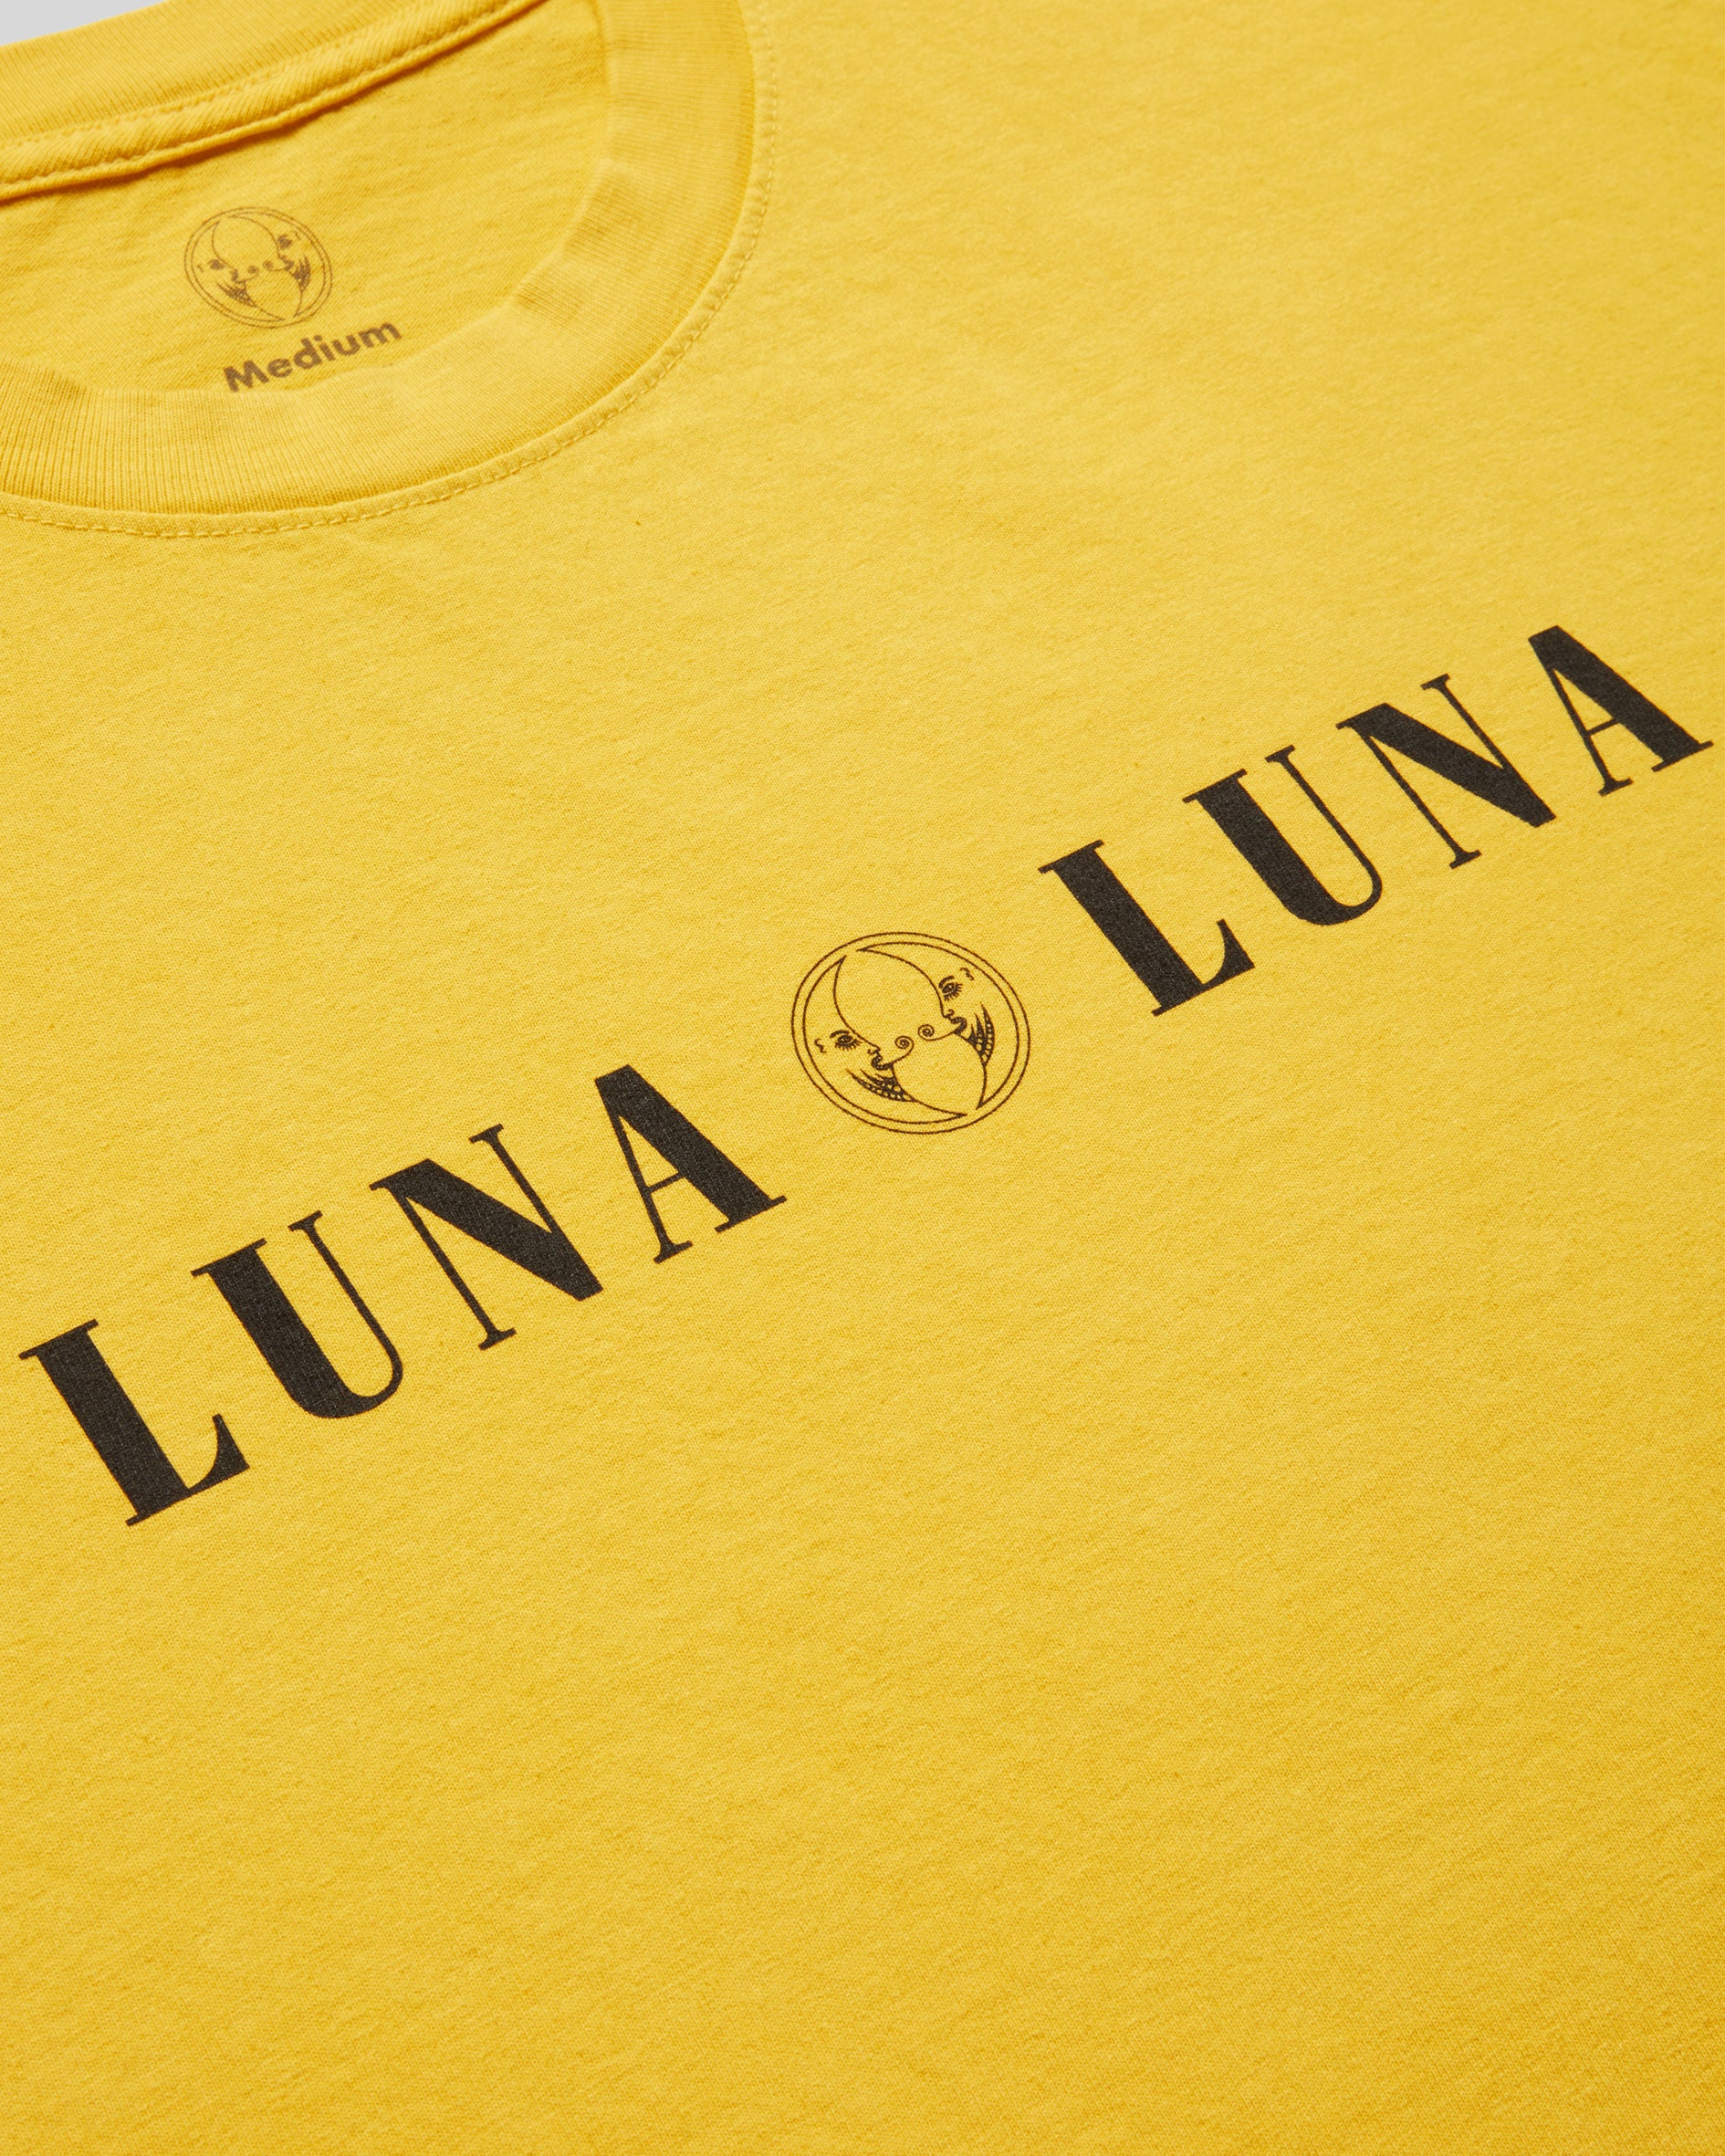 1987 Luna Luna T-Shirt in Yellow. Close up photograph ofyellow t-shirt with black text at chest that reads "LUNA LUNA"